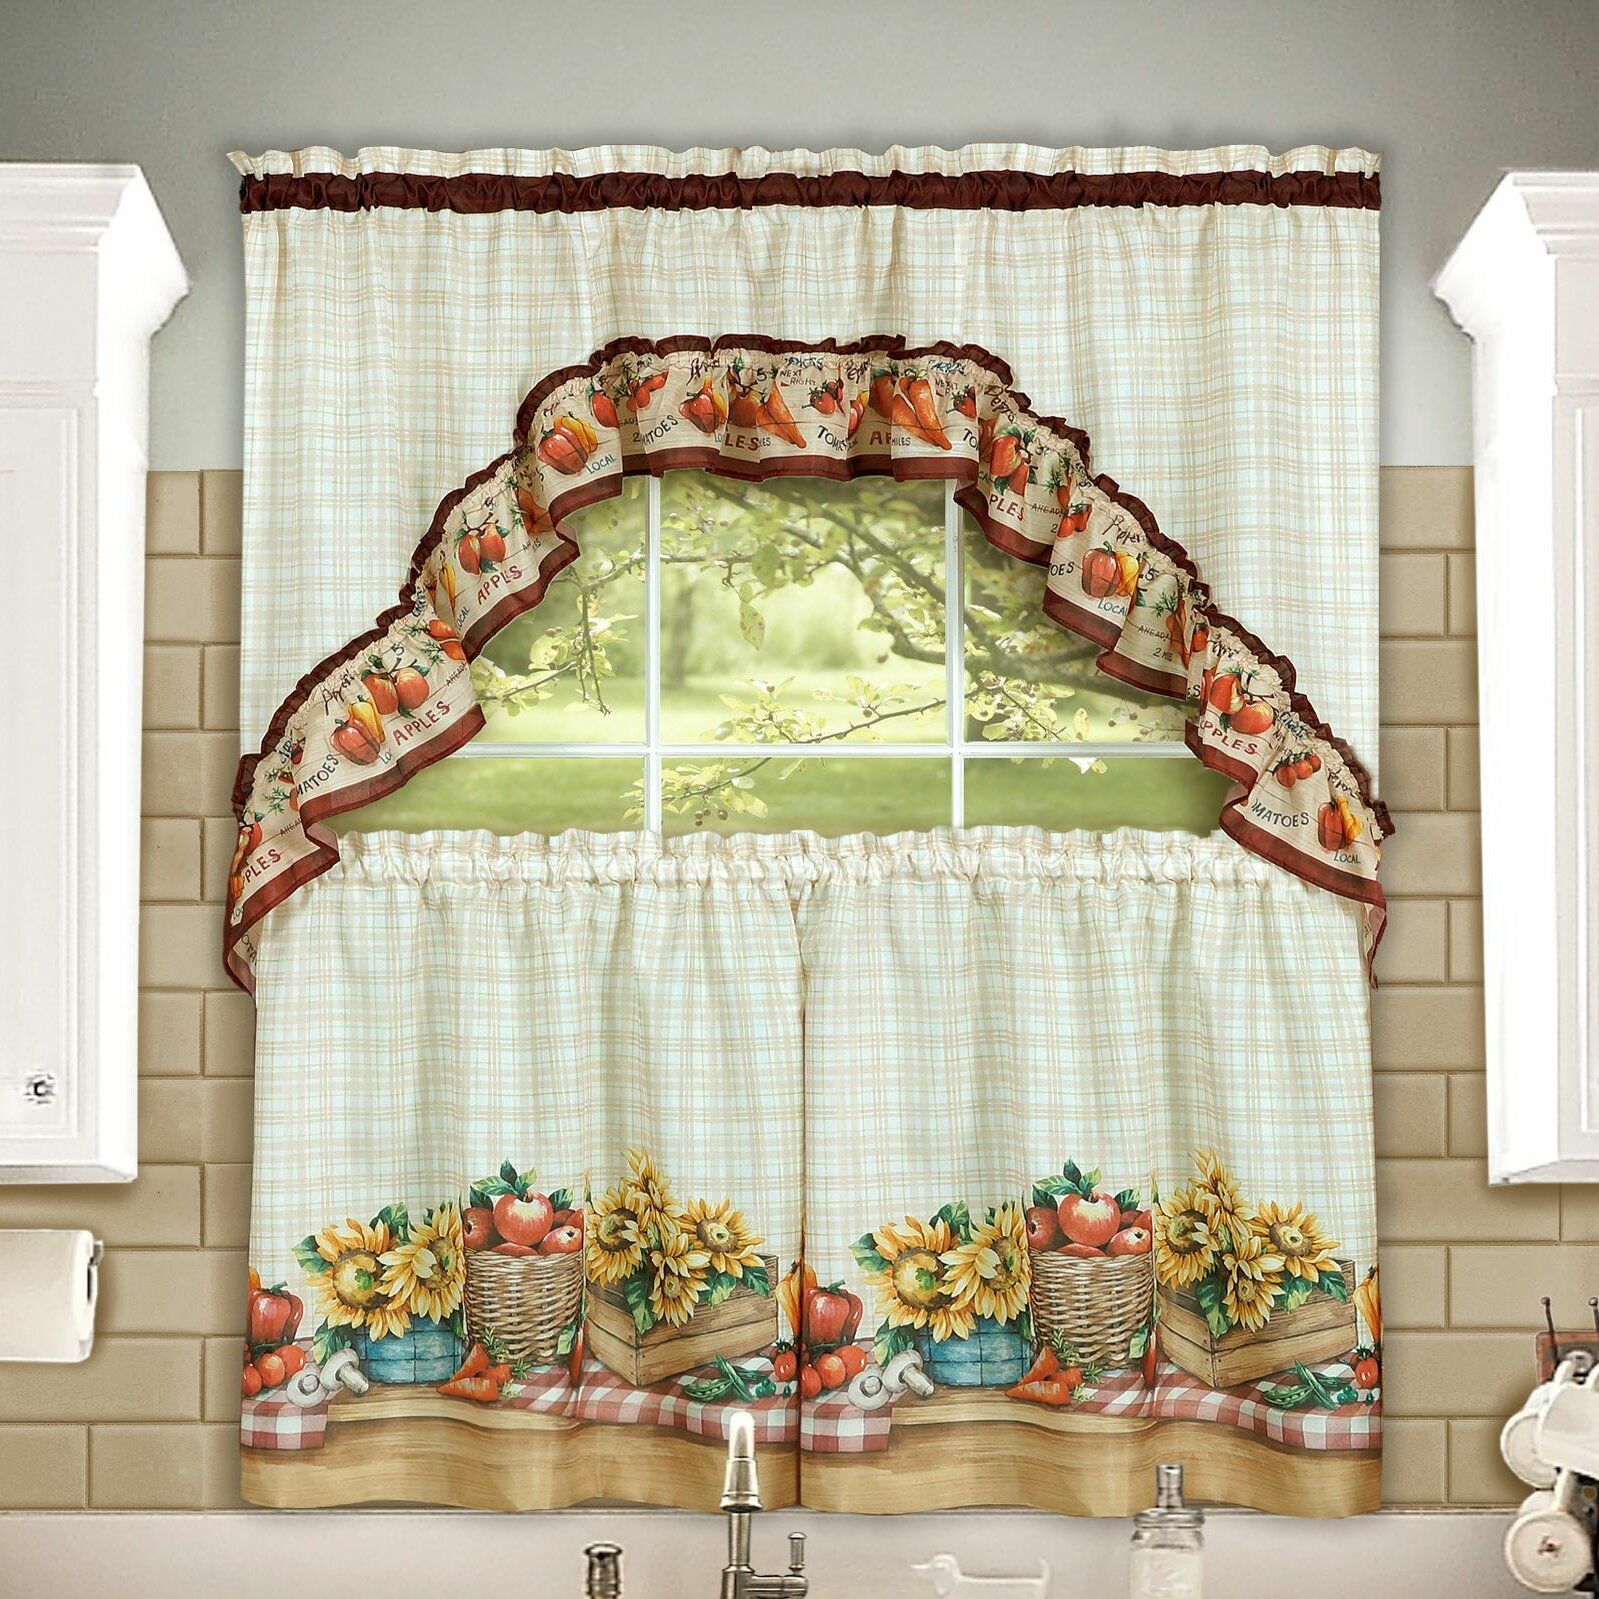 Lockport Farmers Market Printed Tier And Swag Set With Multicolored Printed Curtain Tier And Swag Sets (View 17 of 20)